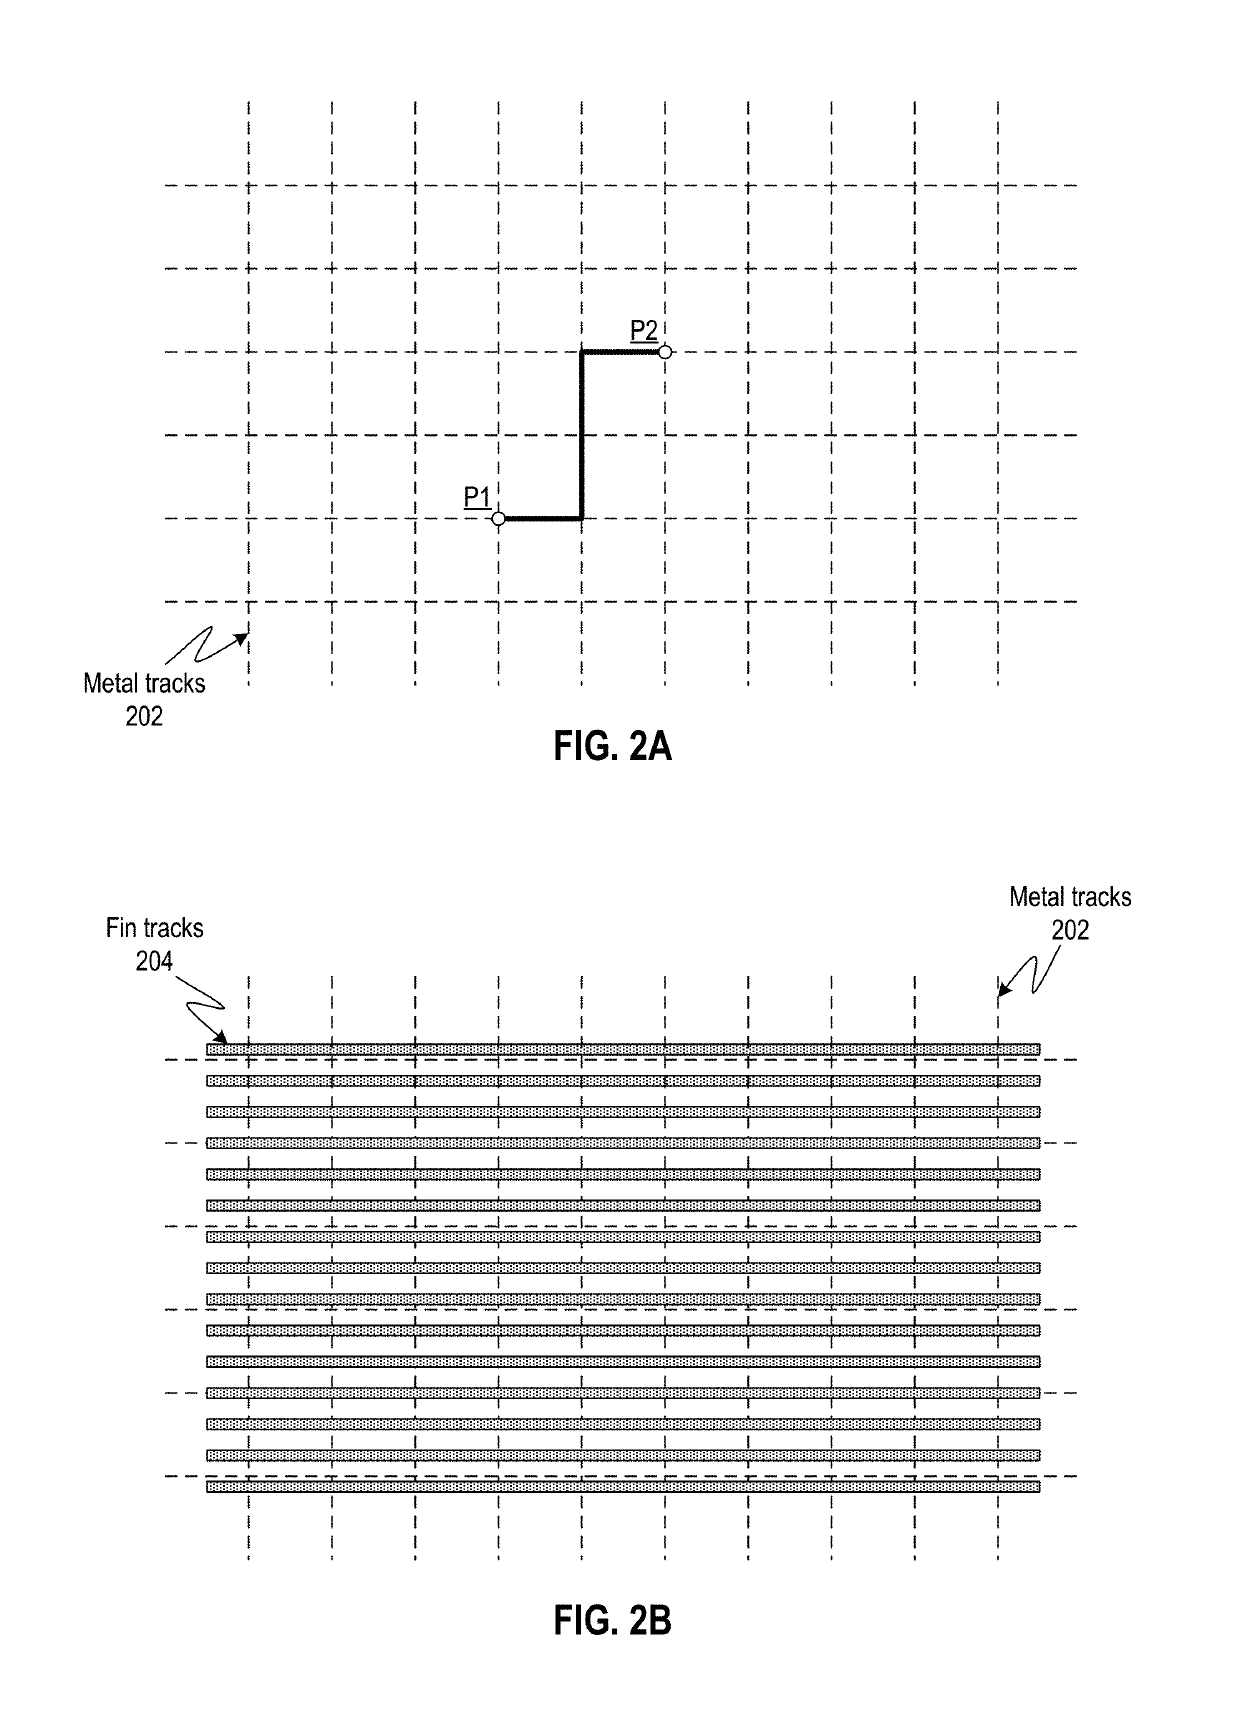 Using color pattern assigned to shapes for custom layout of integrated circuit (IC) designs